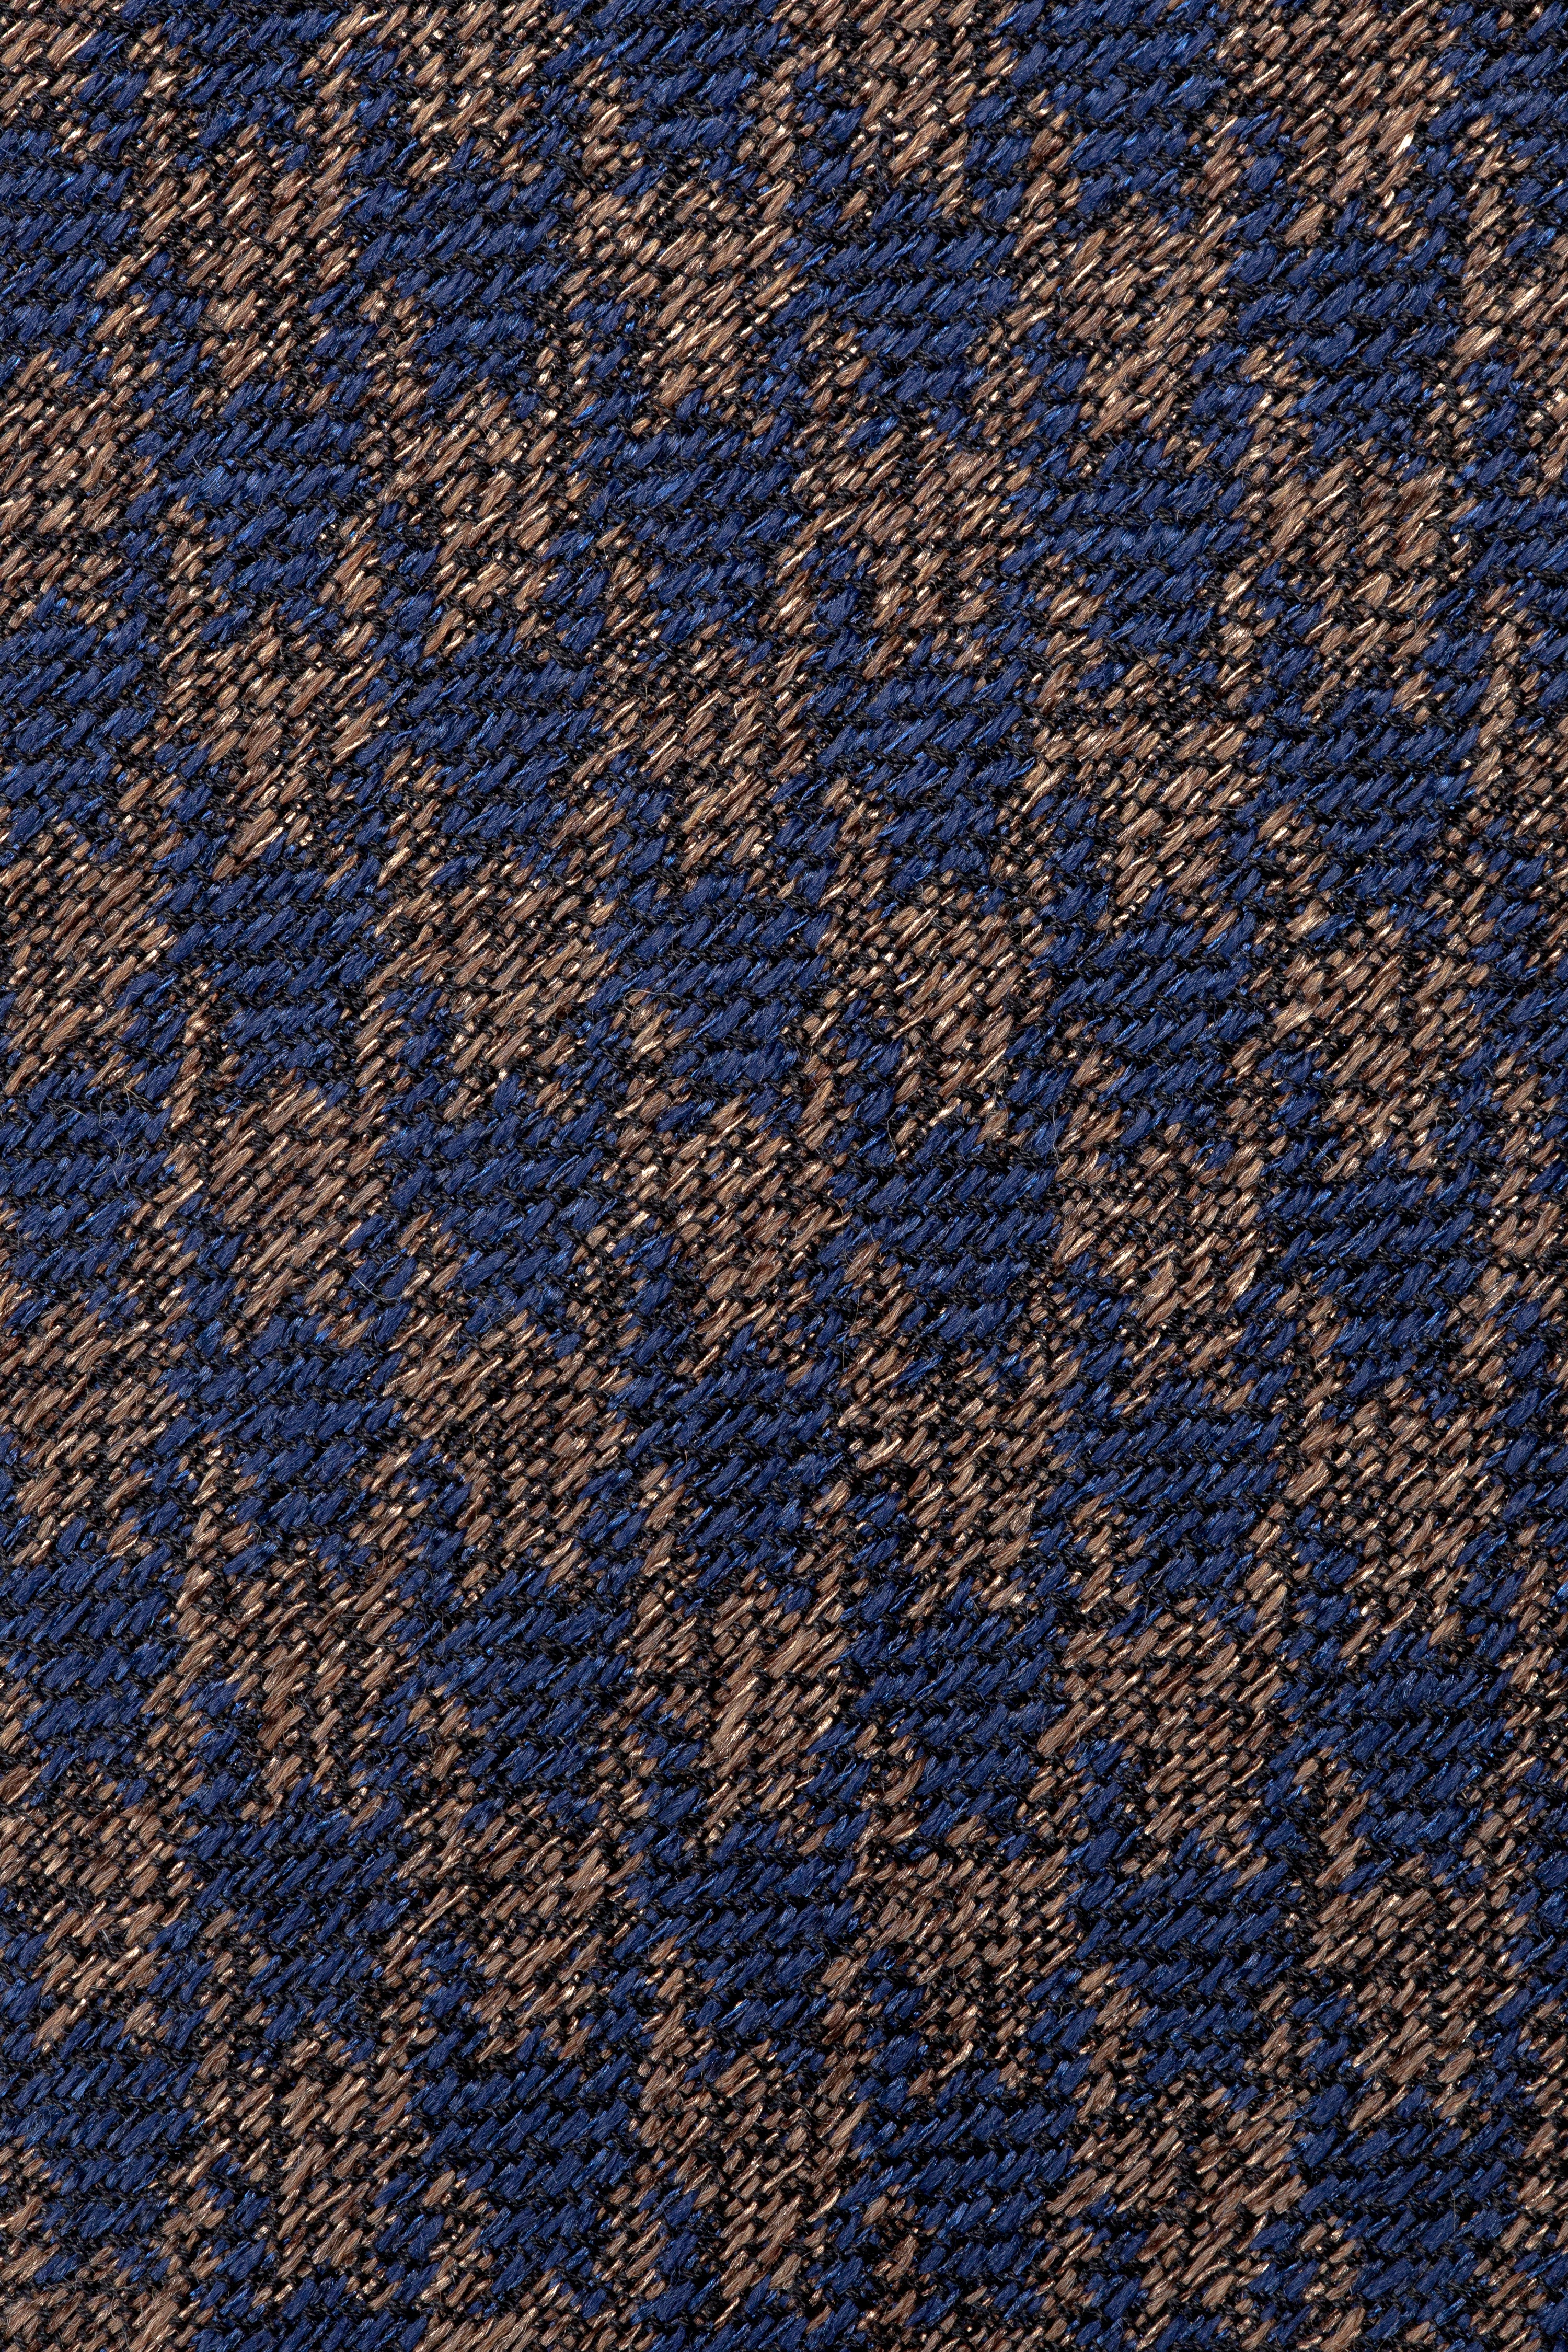 Alt view 1 Noble Houndstooth Woven Tie in Brown